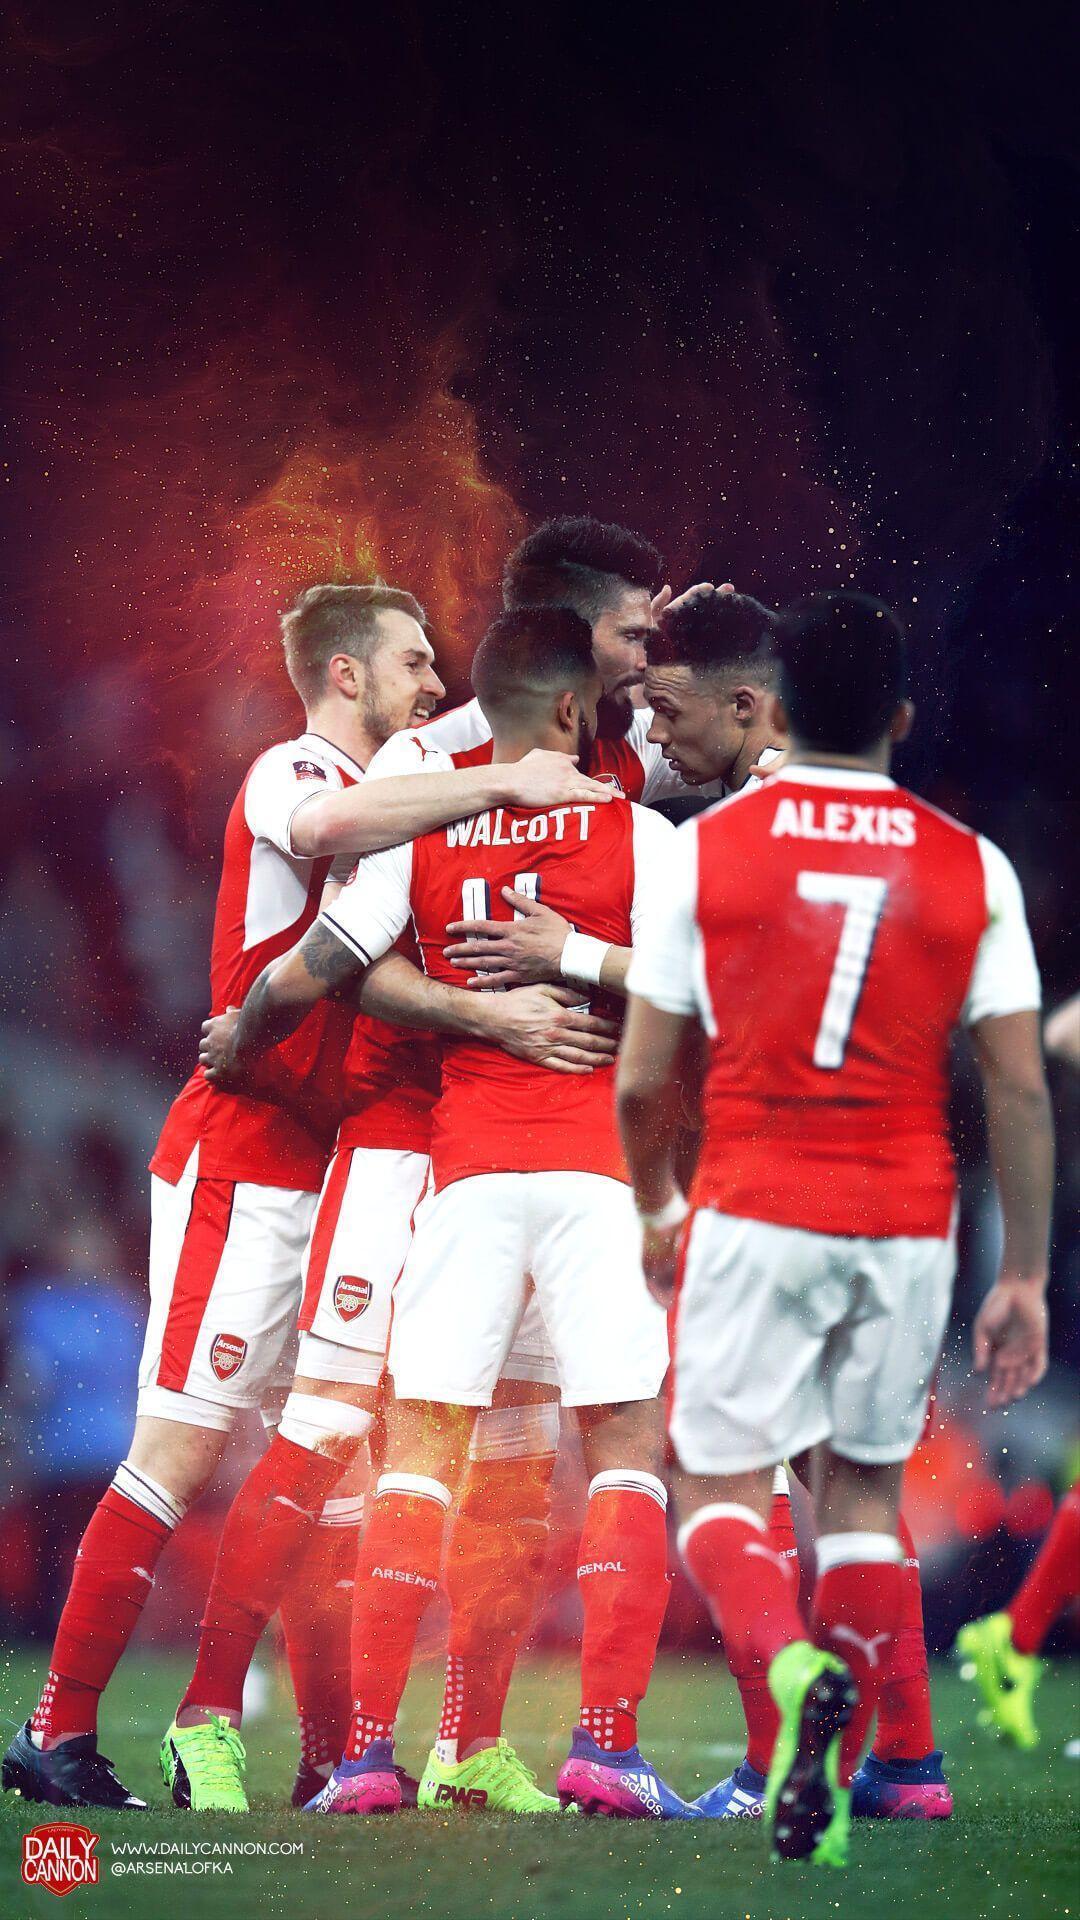 Superb Arsenal Mobile wallpaper from happier times